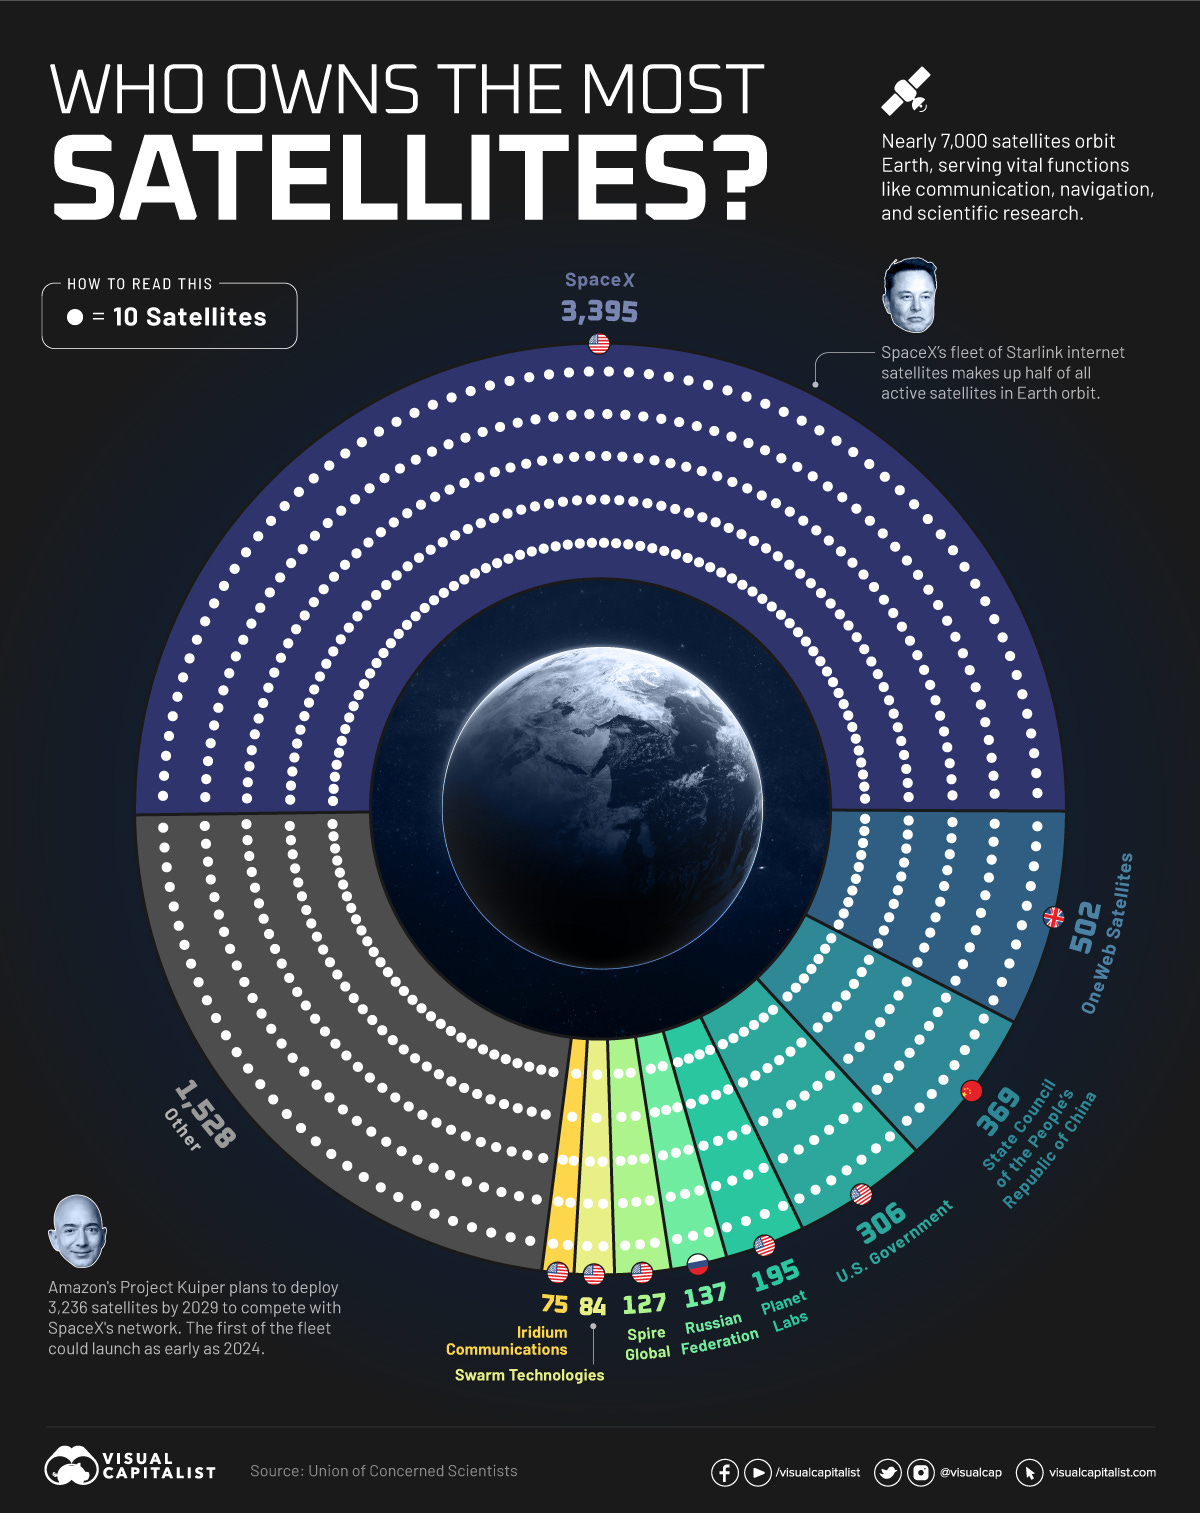 Which Companies Own the Most Satellites?